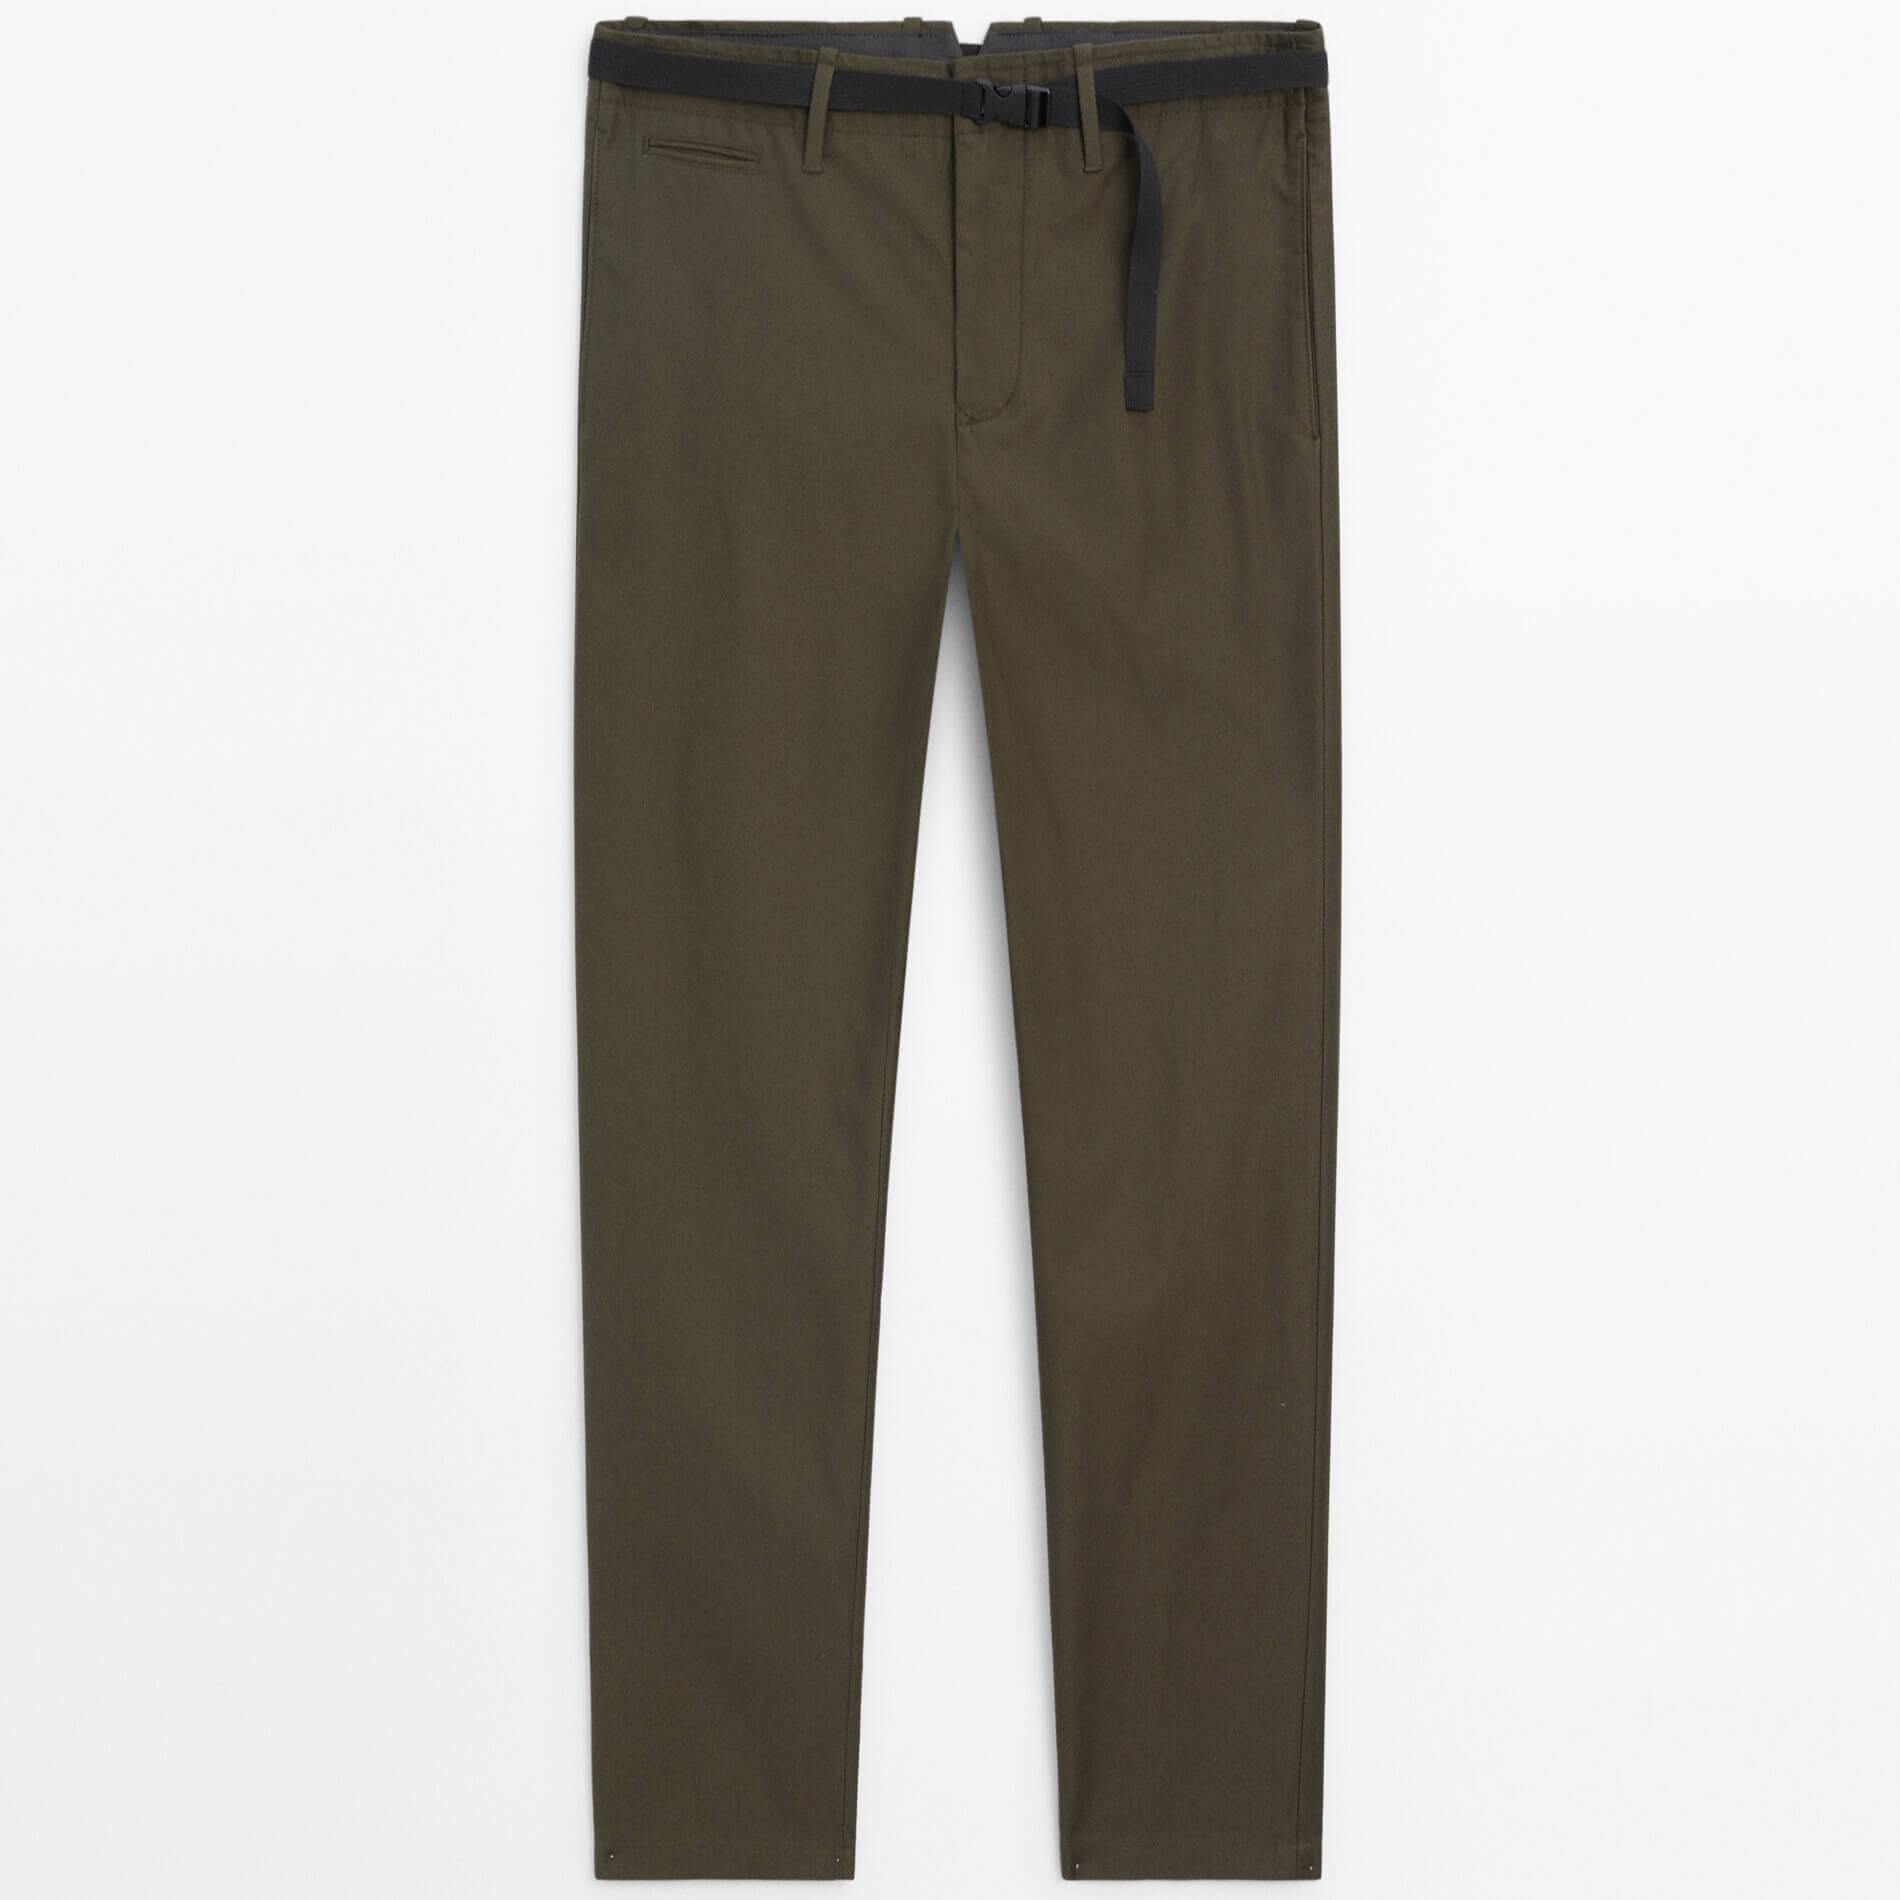 цена Брюки Massimo Dutti Relaxed Fit Belted Chino, хаки